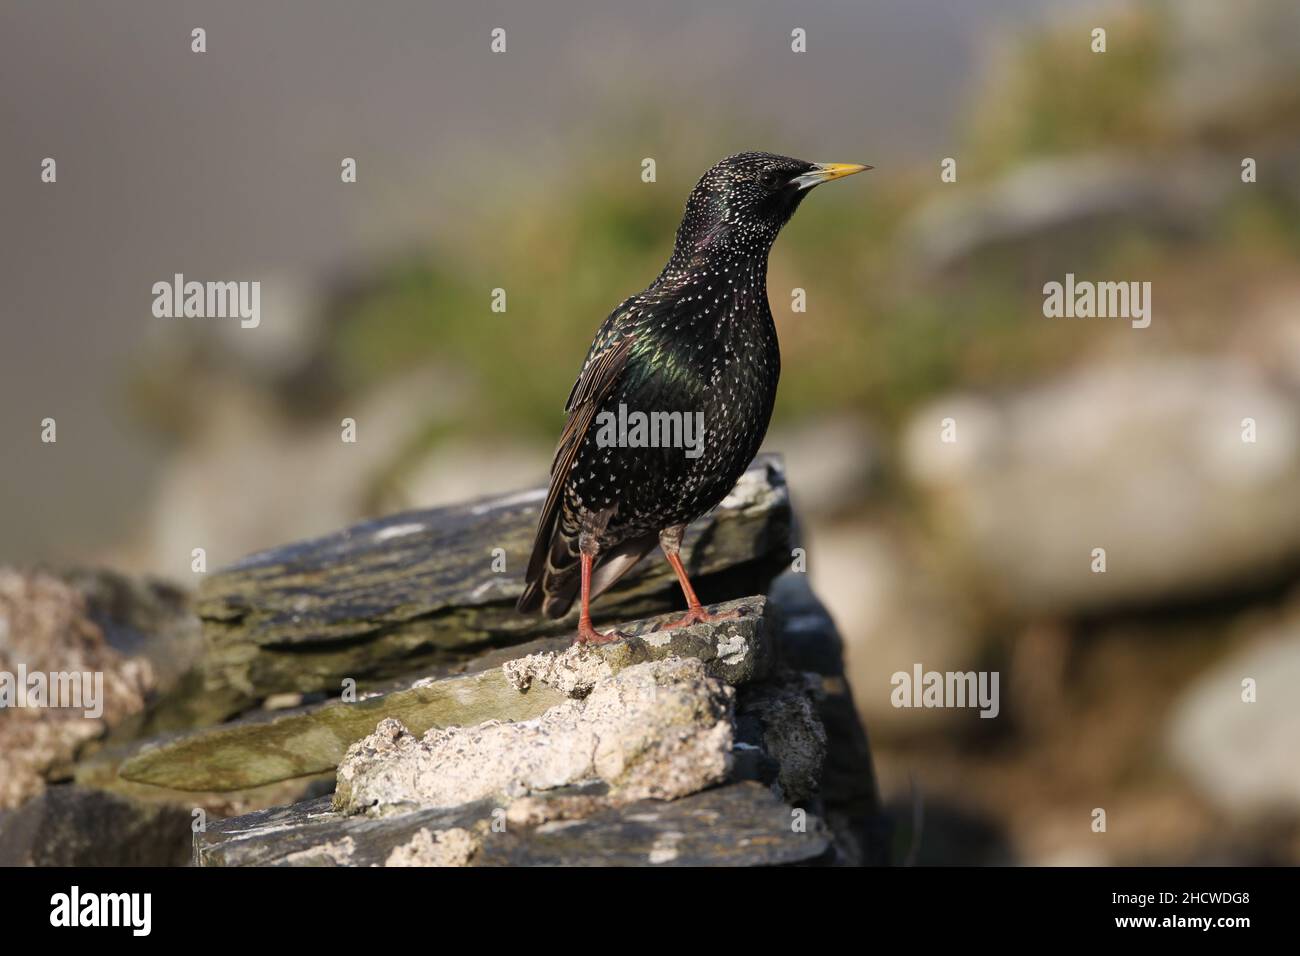 The male starling has blue at the base of its bill,  the female pink. Starlings may be found in many habitats where they search for food. Stock Photo